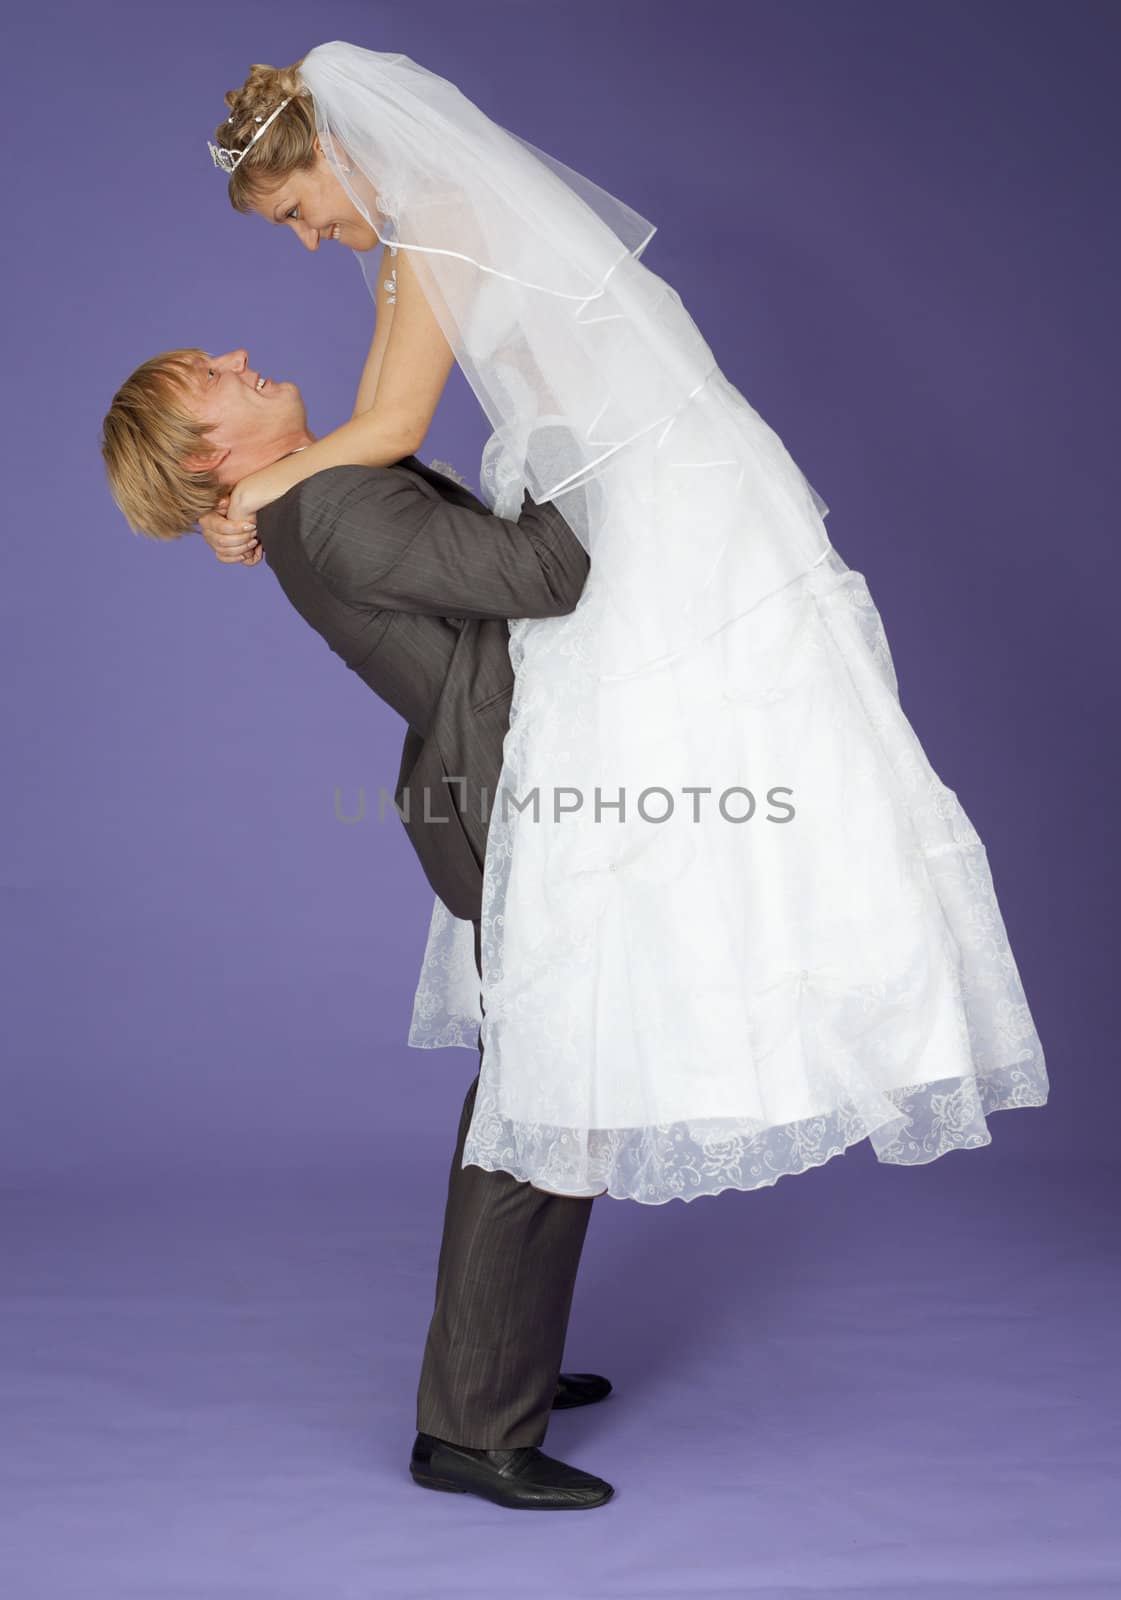 The strong groom holds the admired bride on hands